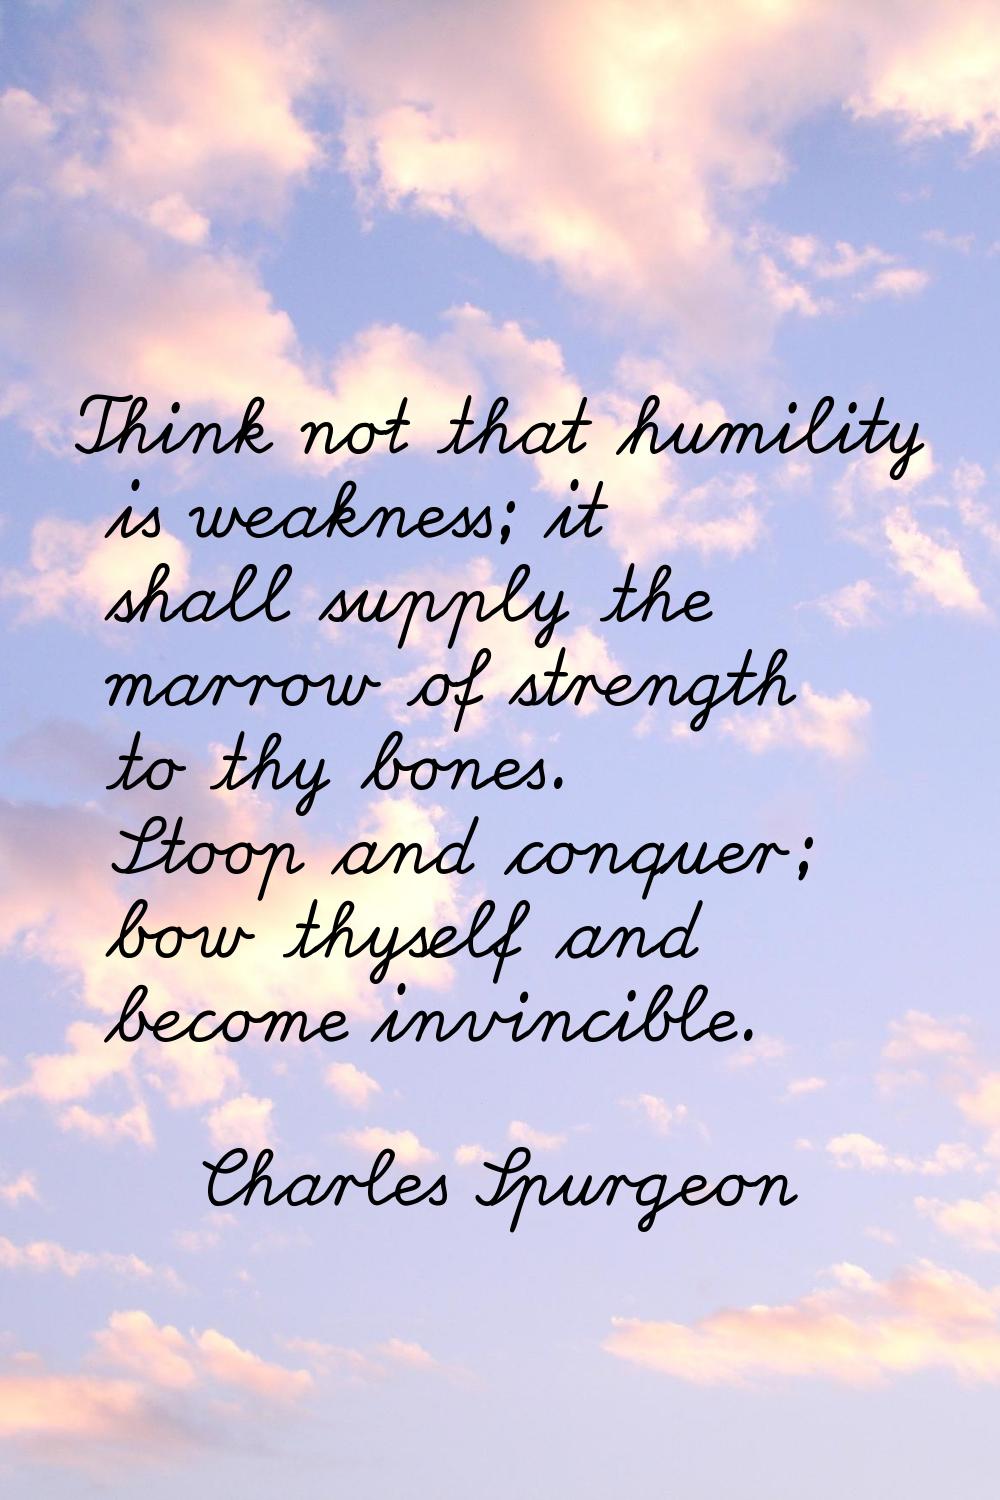 Think not that humility is weakness; it shall supply the marrow of strength to thy bones. Stoop and